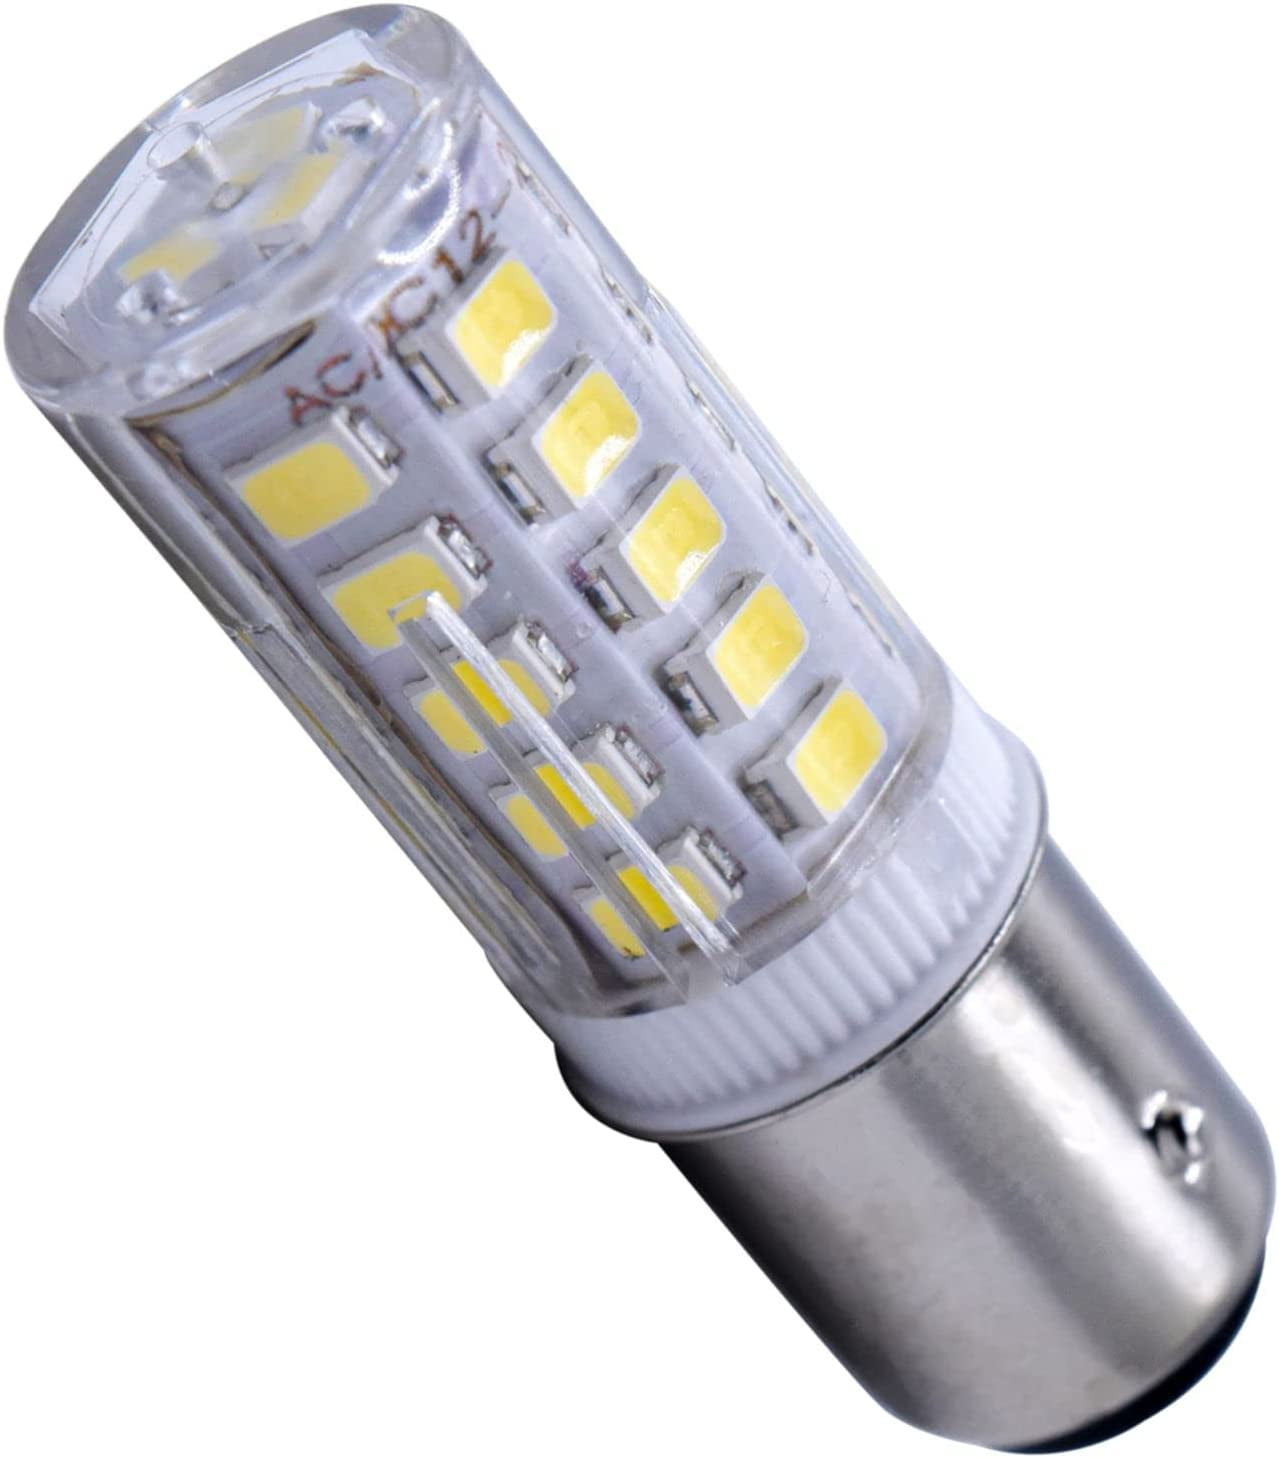 HQRP BAY15d 33LED SMD2835 Cool White LED Bulb for Ancor Marine 529340 Double Contact Index Base Bulbs - Walmart.com